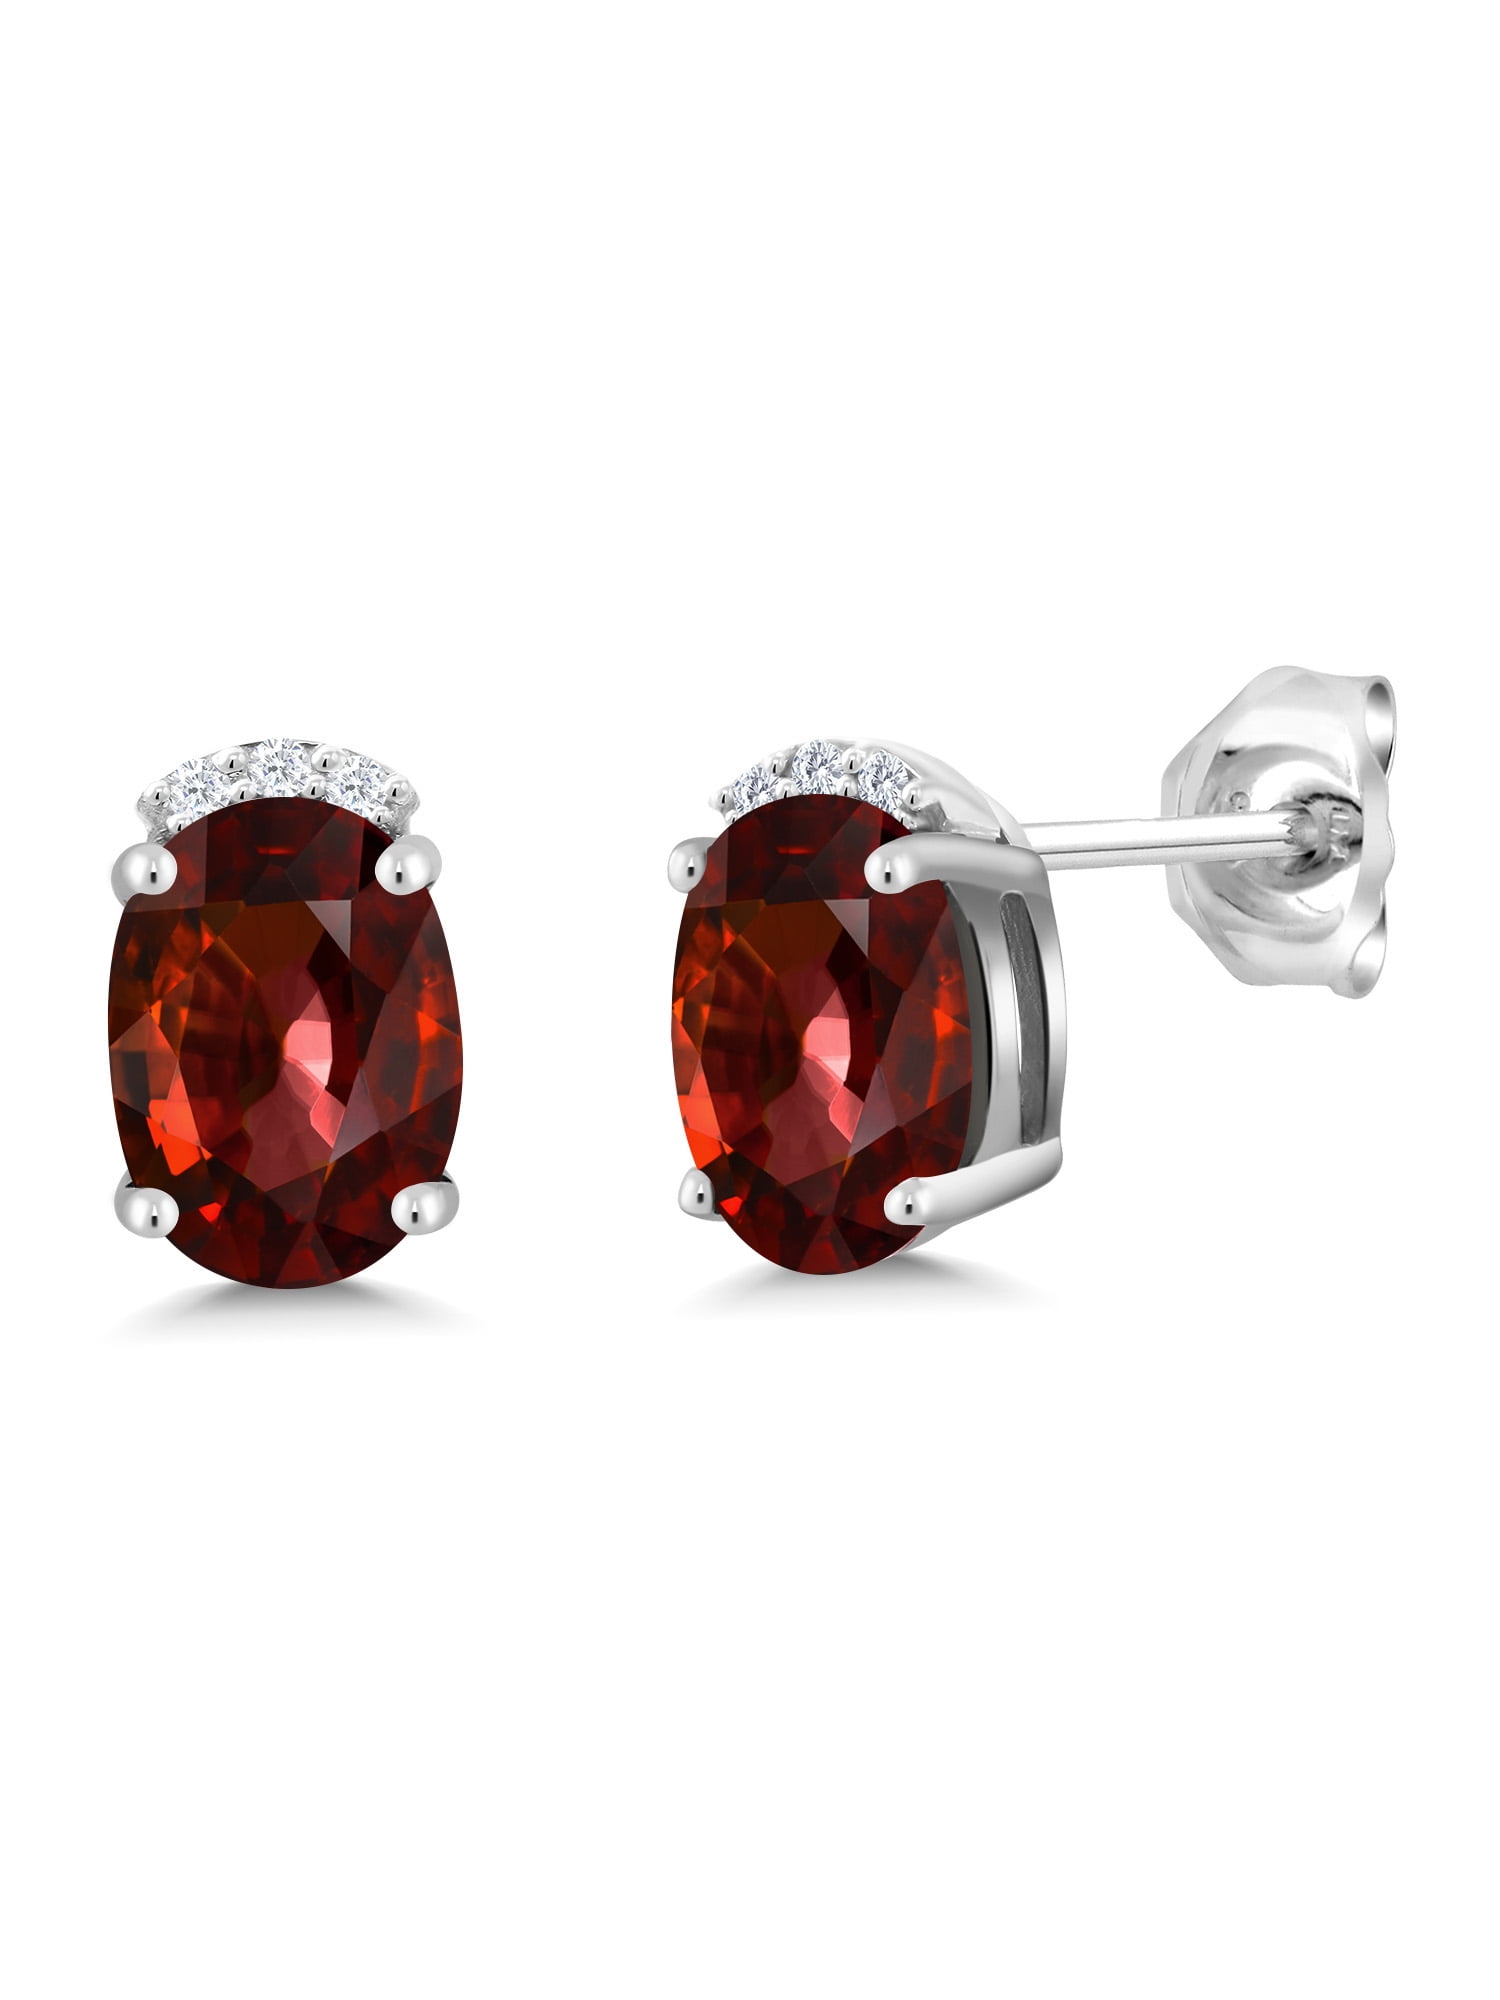 925 Silver Plated Simulated RUBY EMERALD & SAPPHIRE 4 Gemstone Earrings 1.6" 